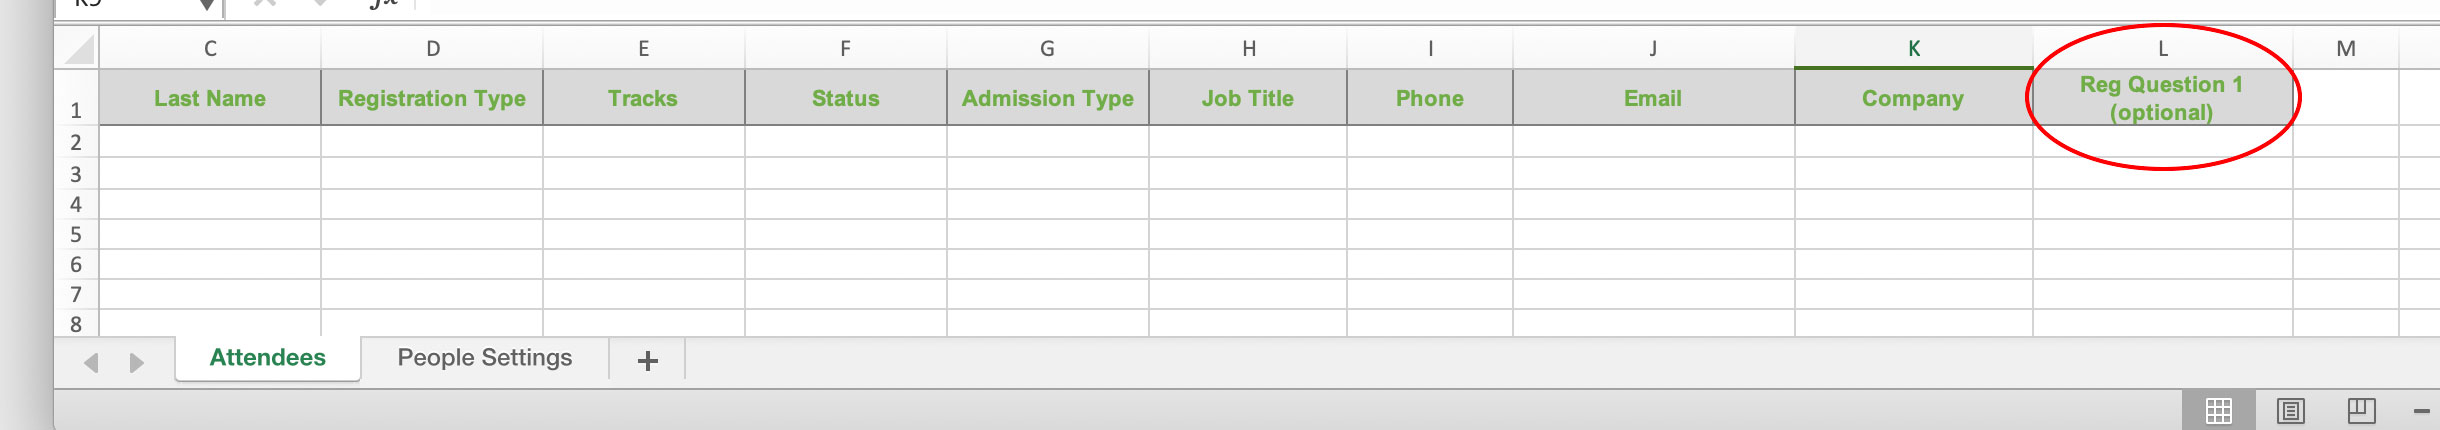 Reg Question field on excel template